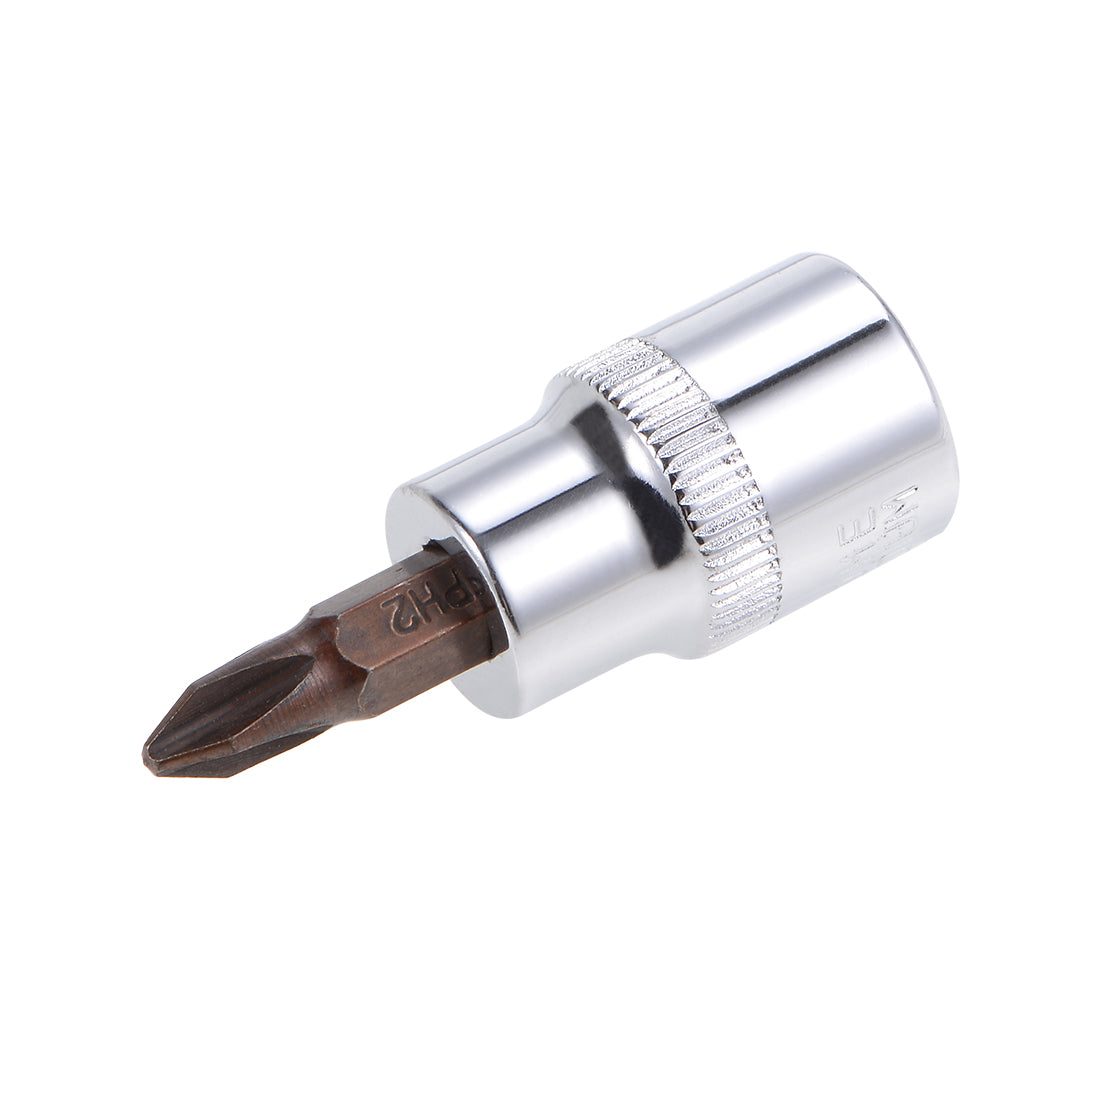 Uxcell Uxcell 3/8" Drive x PH3 Phillips Bit Socket, Standard Metric, S2 and Cr-V Steel